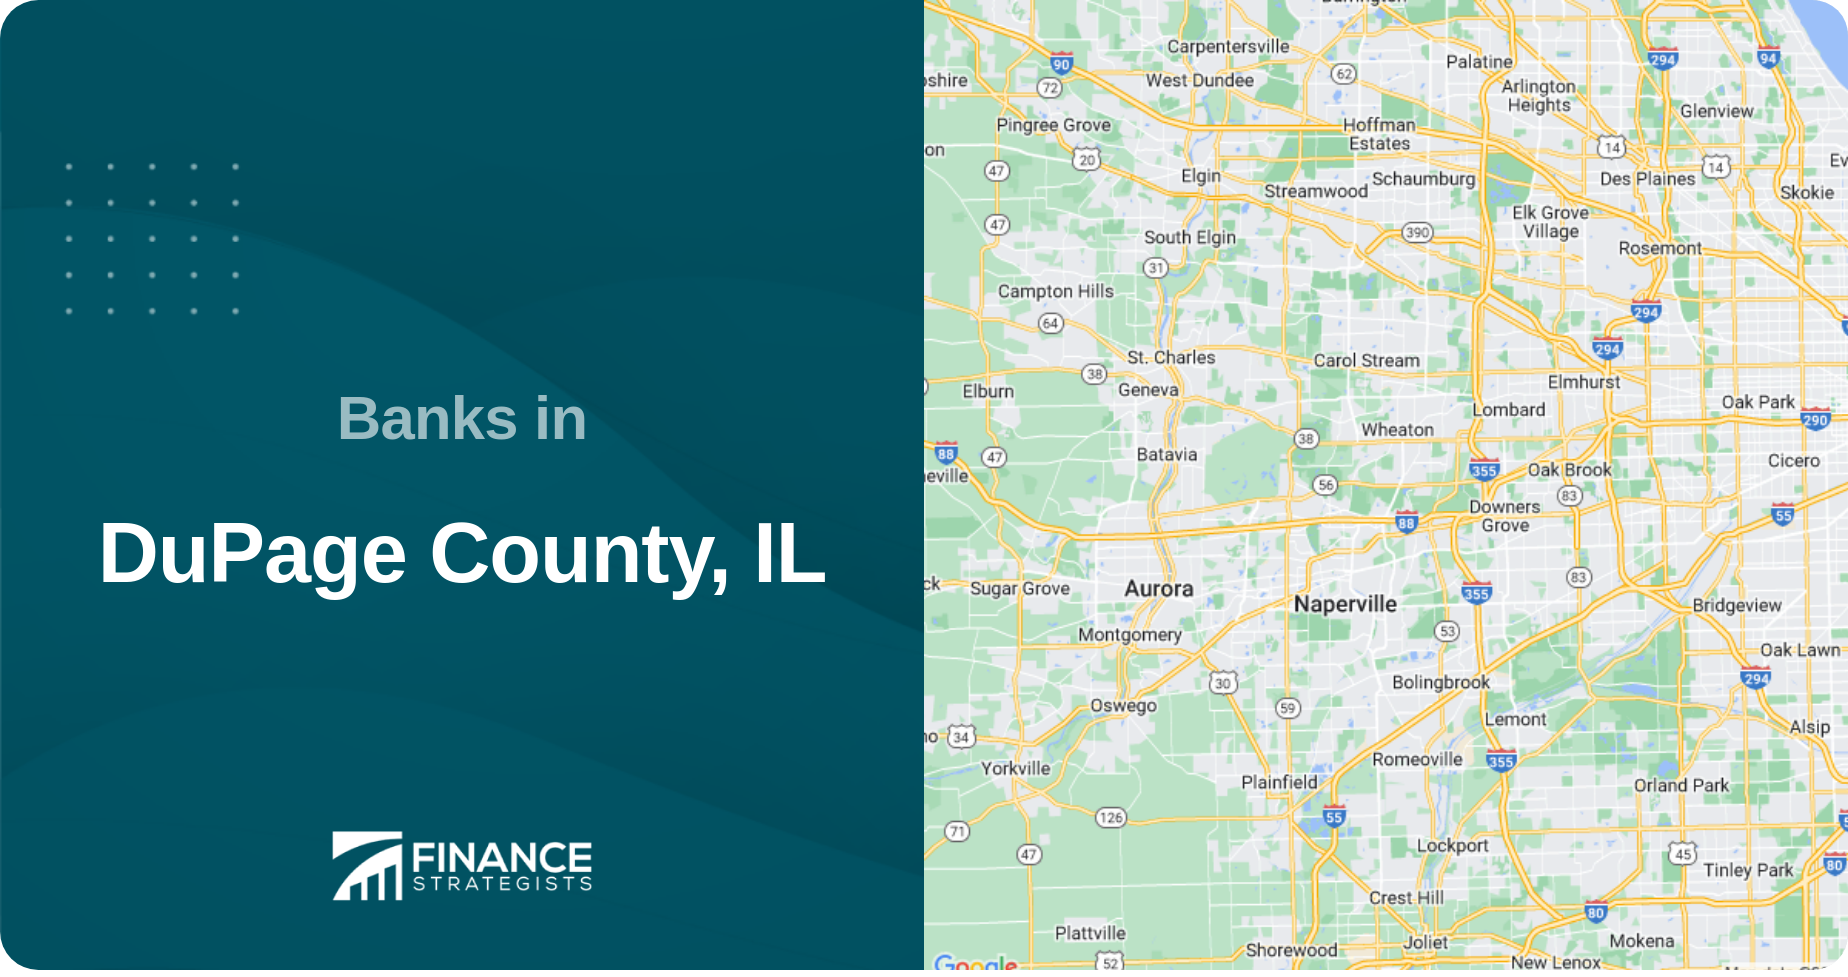 Banks in DuPage County, IL